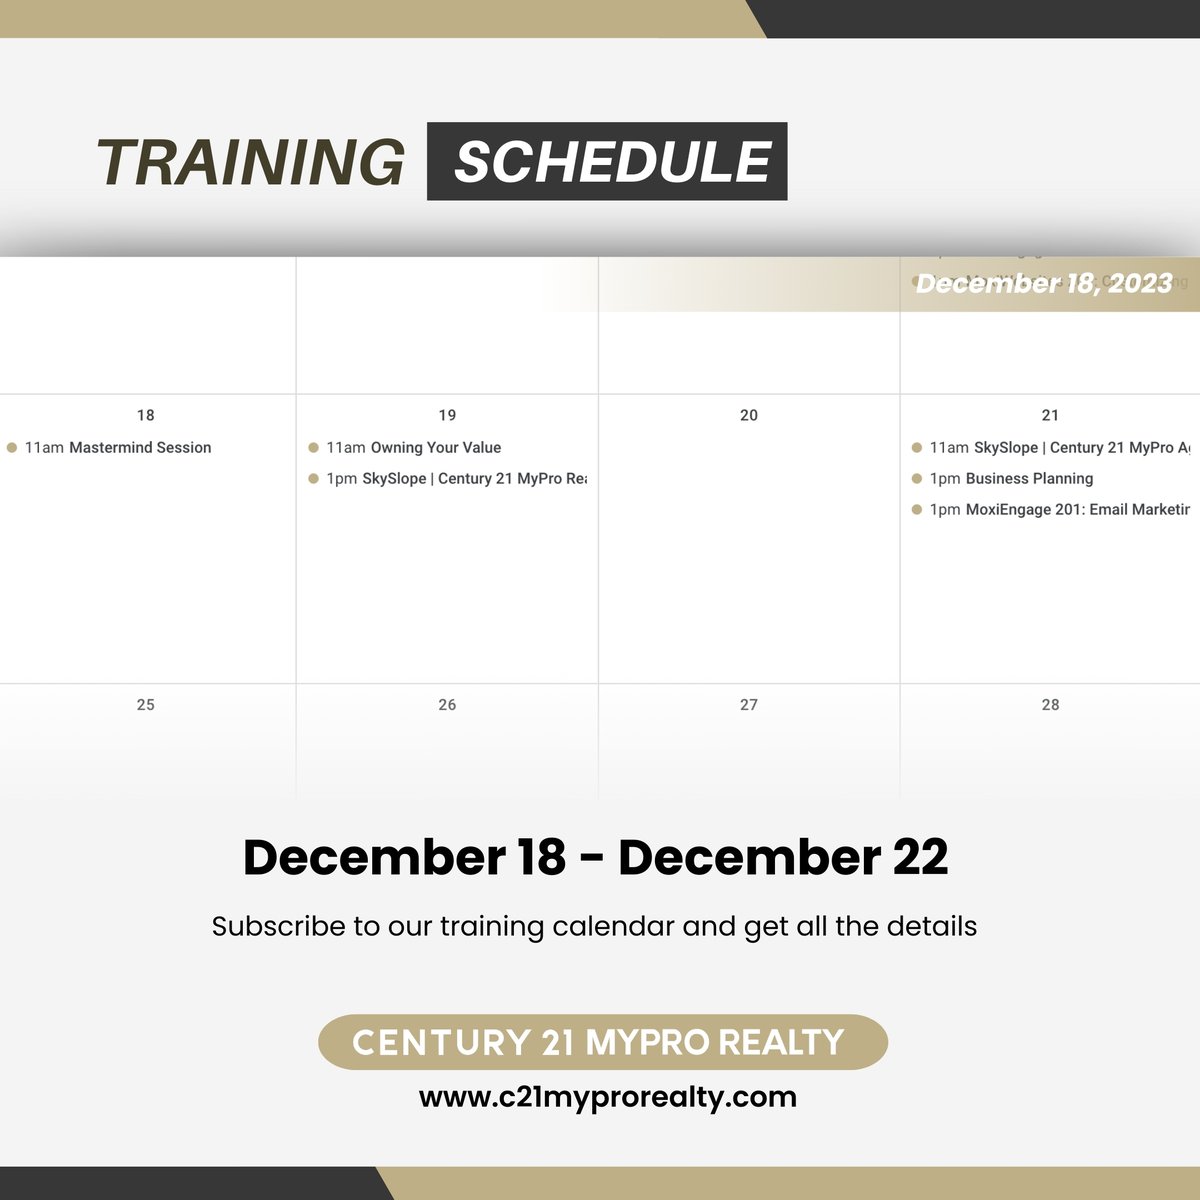 🌟 Enhance Your Expertise - Dec 18-22 training sessions Century 21 MyPro Realty! 🌟
Join us for growth and empowerment. Let's elevate the real estate experience together.

#RealEstateTraining #TorontoRealEstate #AgentDevelopment #ProfessionalGrowth